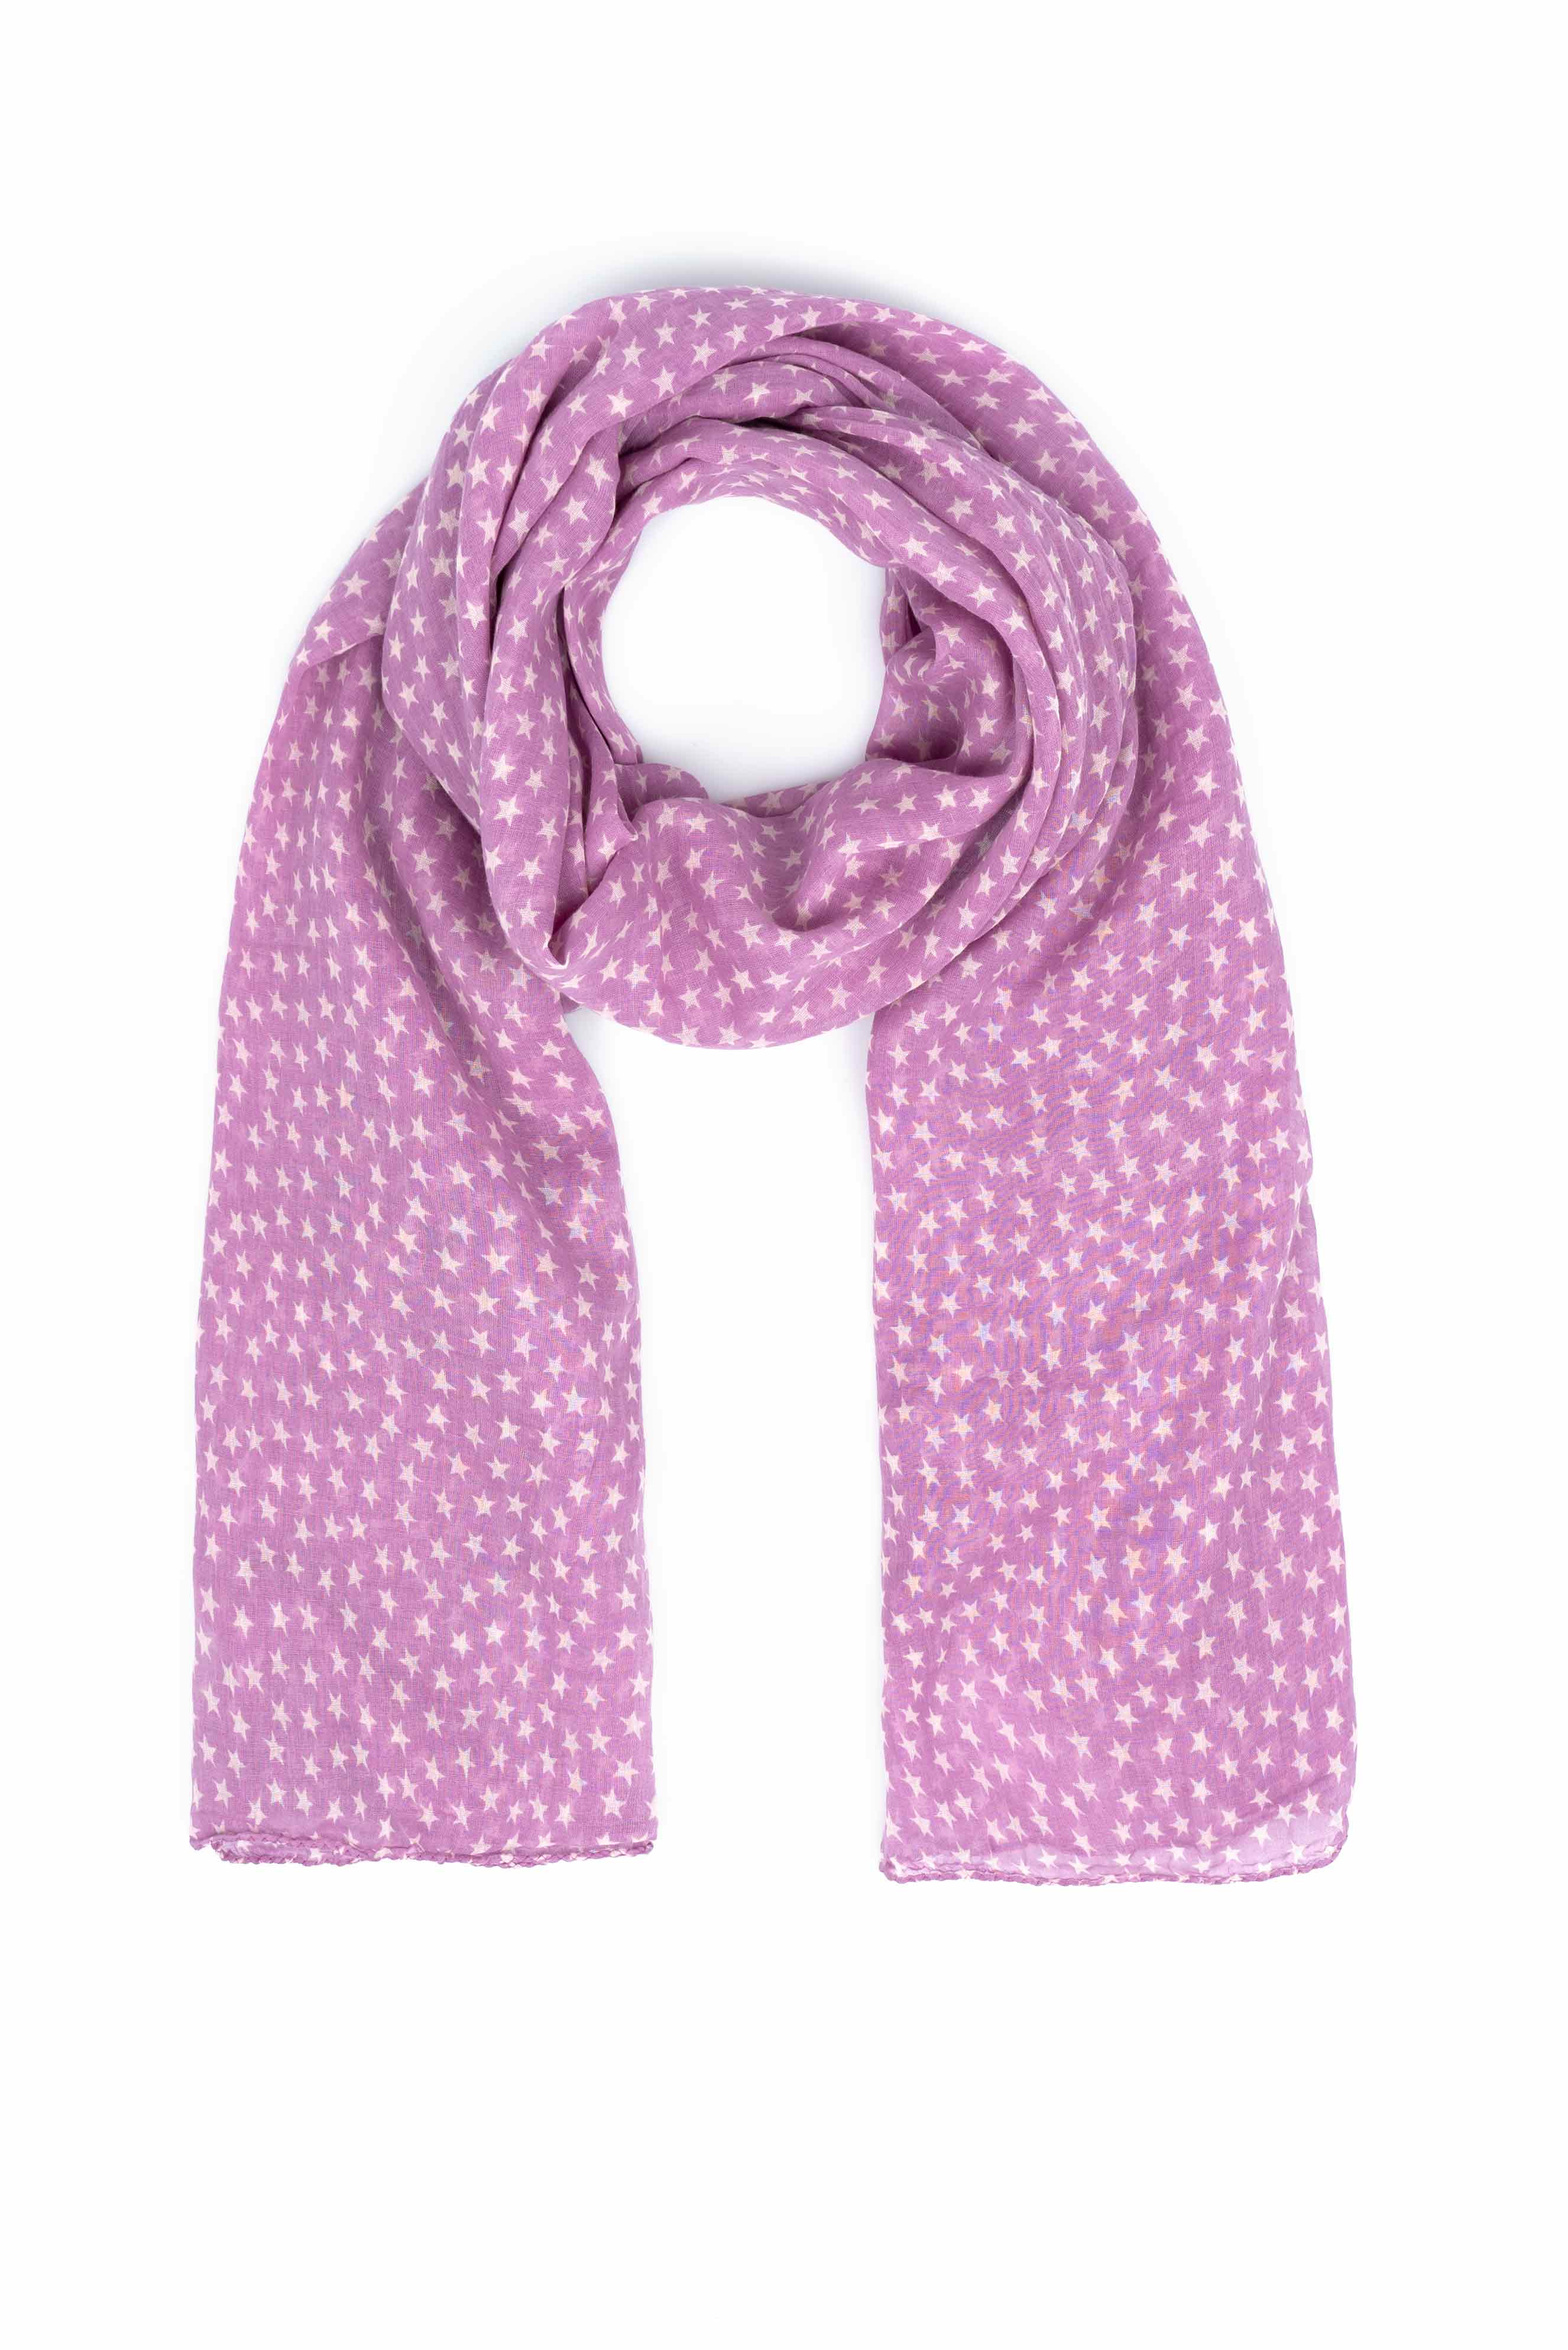 bk120_tiny_star_scarf_pink-and-white-new.jpg